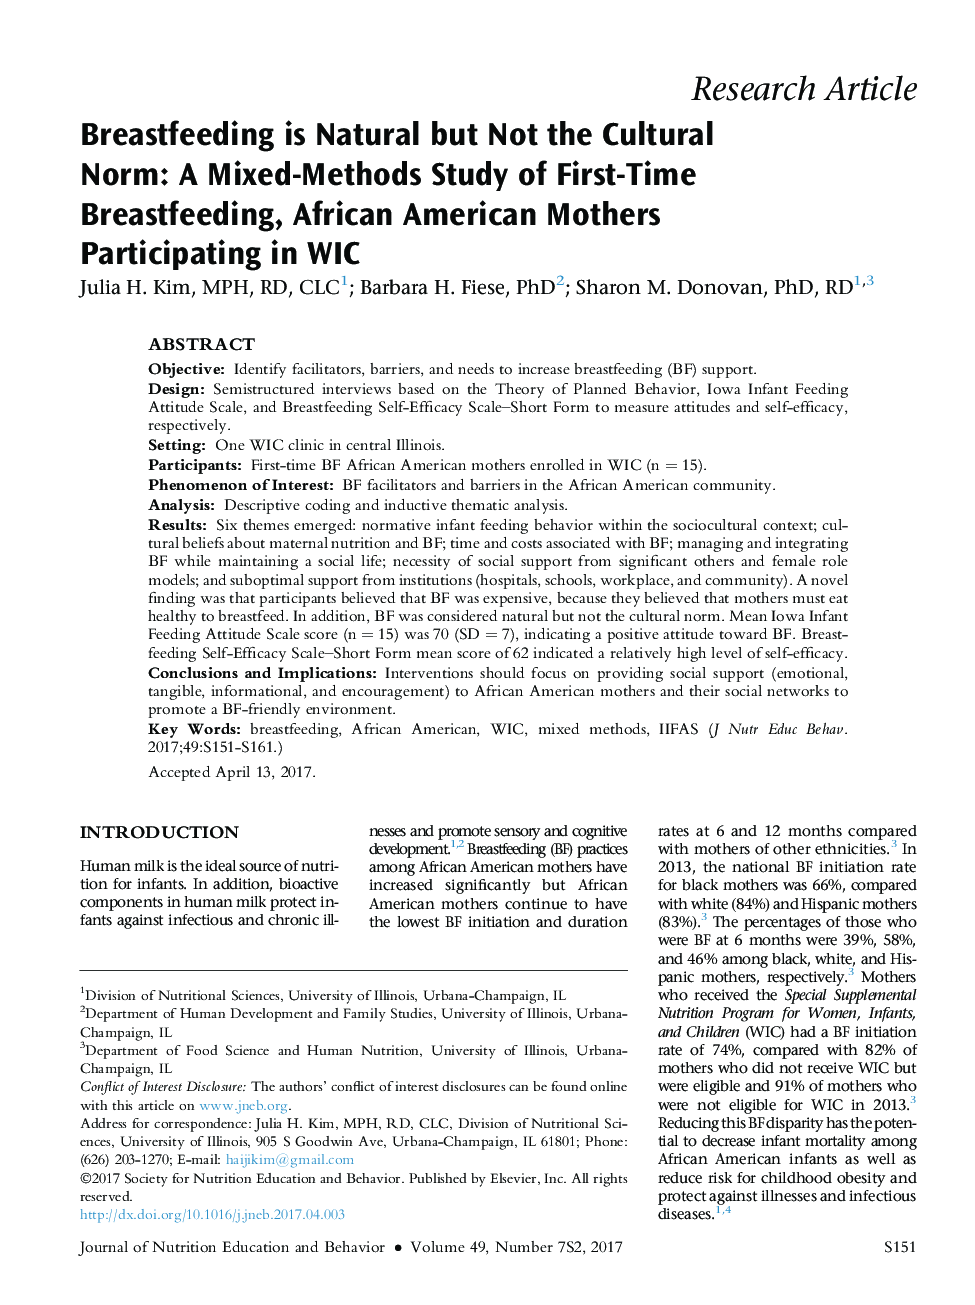 Breastfeeding is Natural but Not the Cultural Norm: A Mixed-Methods Study of First-Time Breastfeeding, African American Mothers Participating in WIC